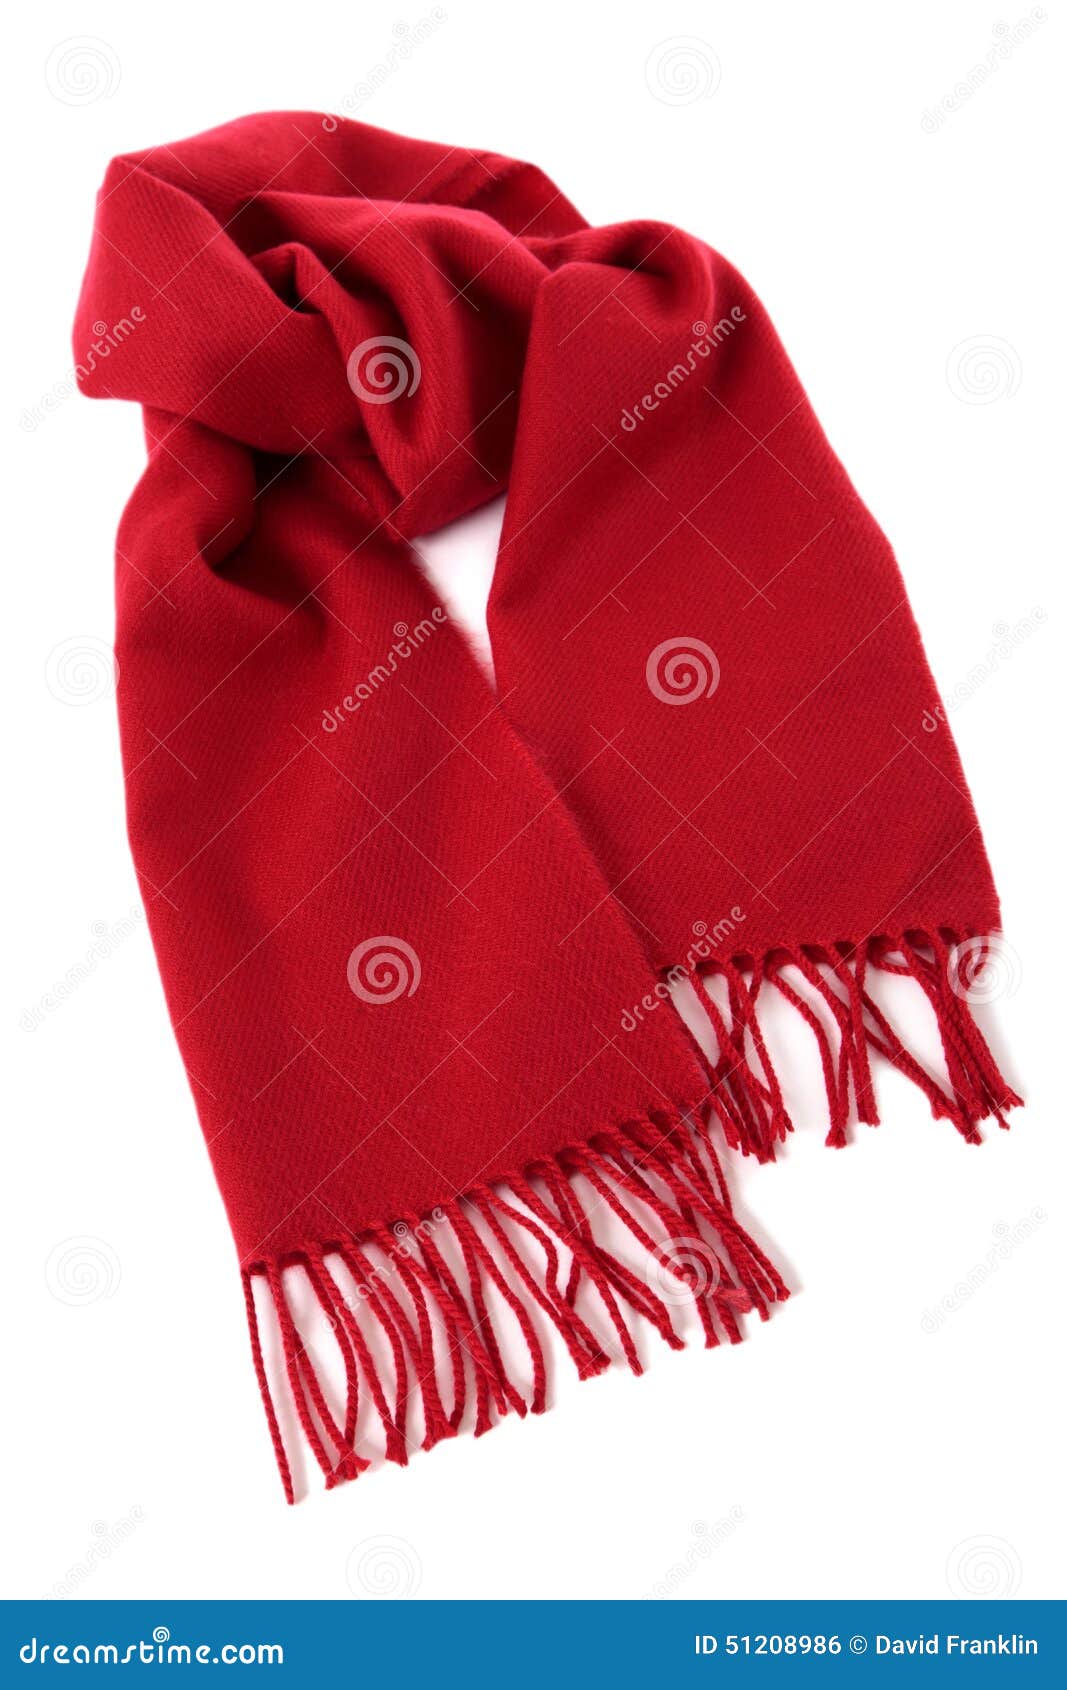 red winter scarf